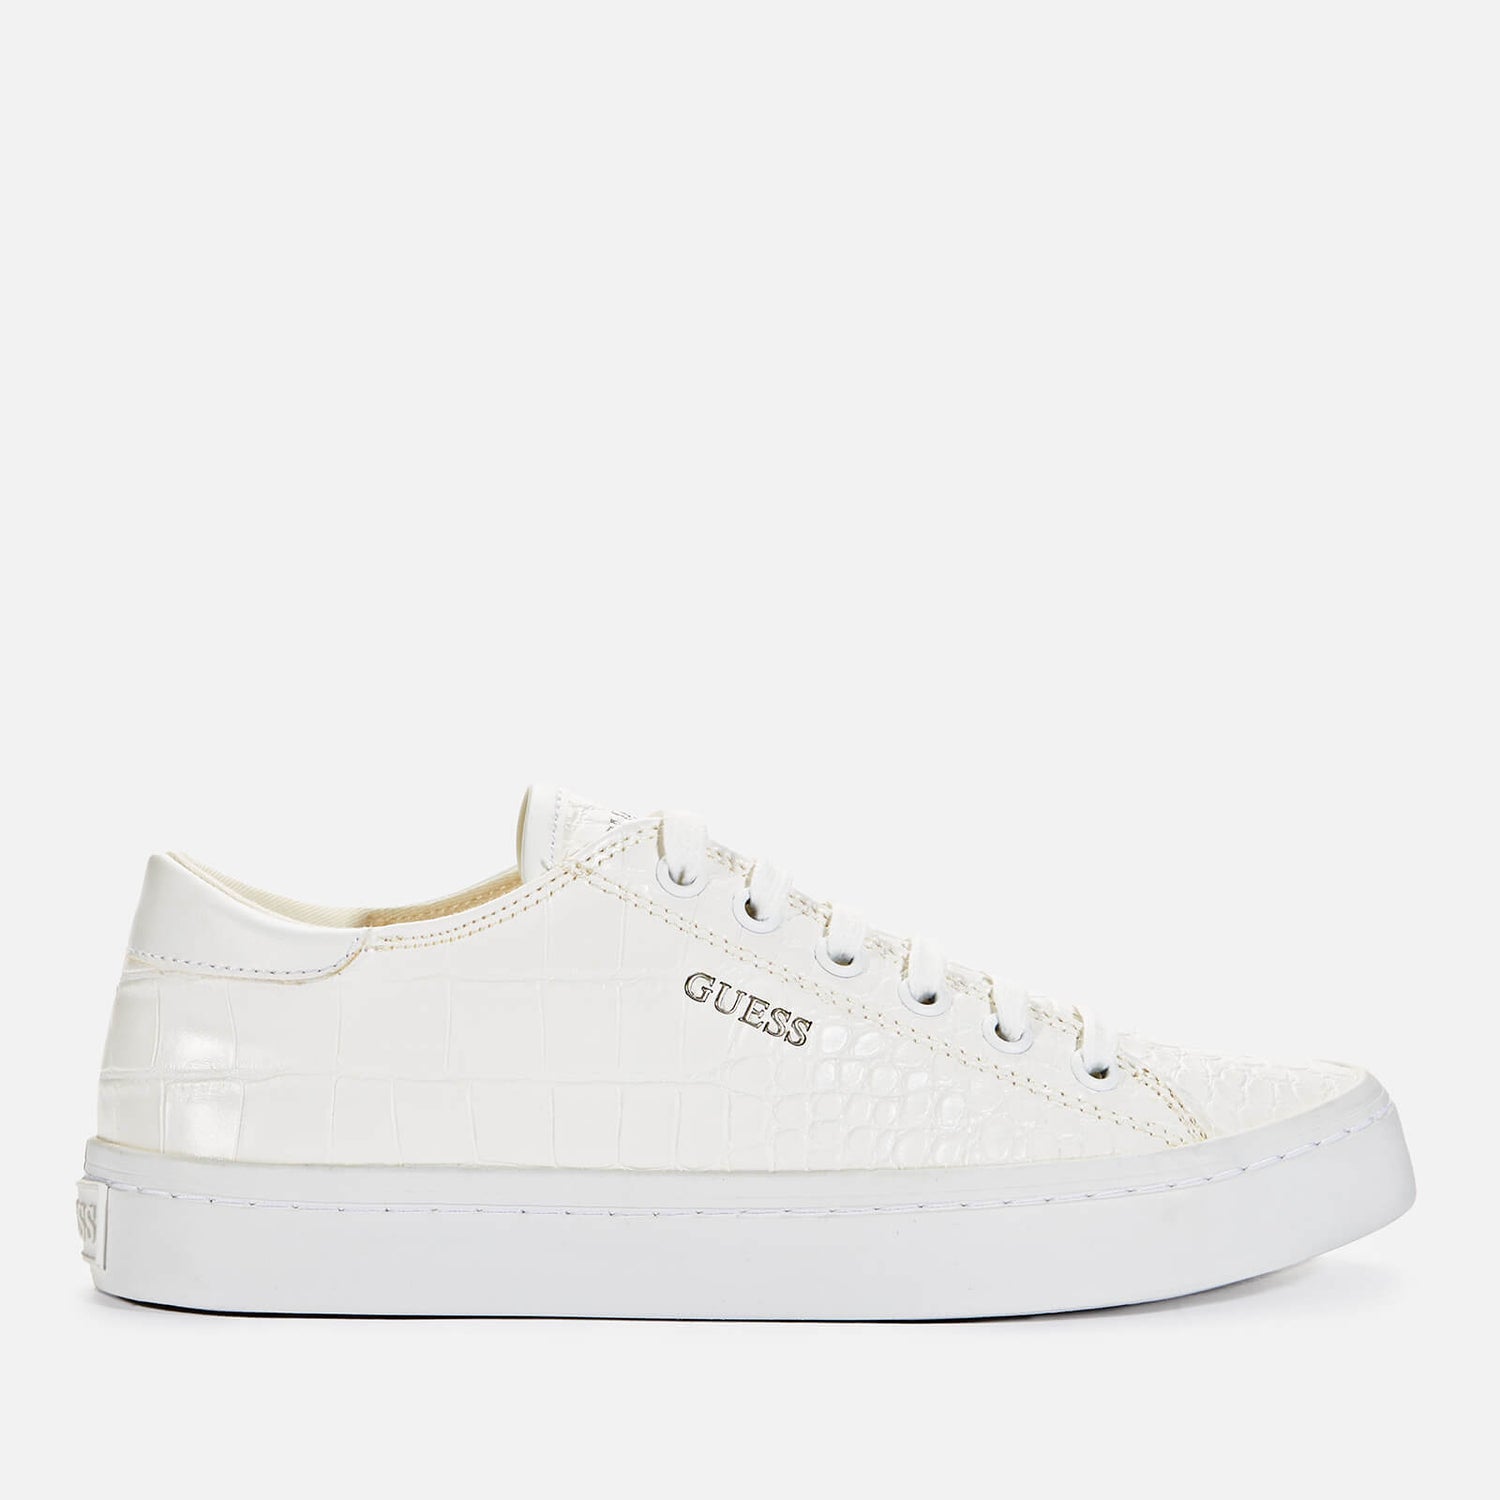 Guess Women's Ester Printed Leather Low Top Trainers - White